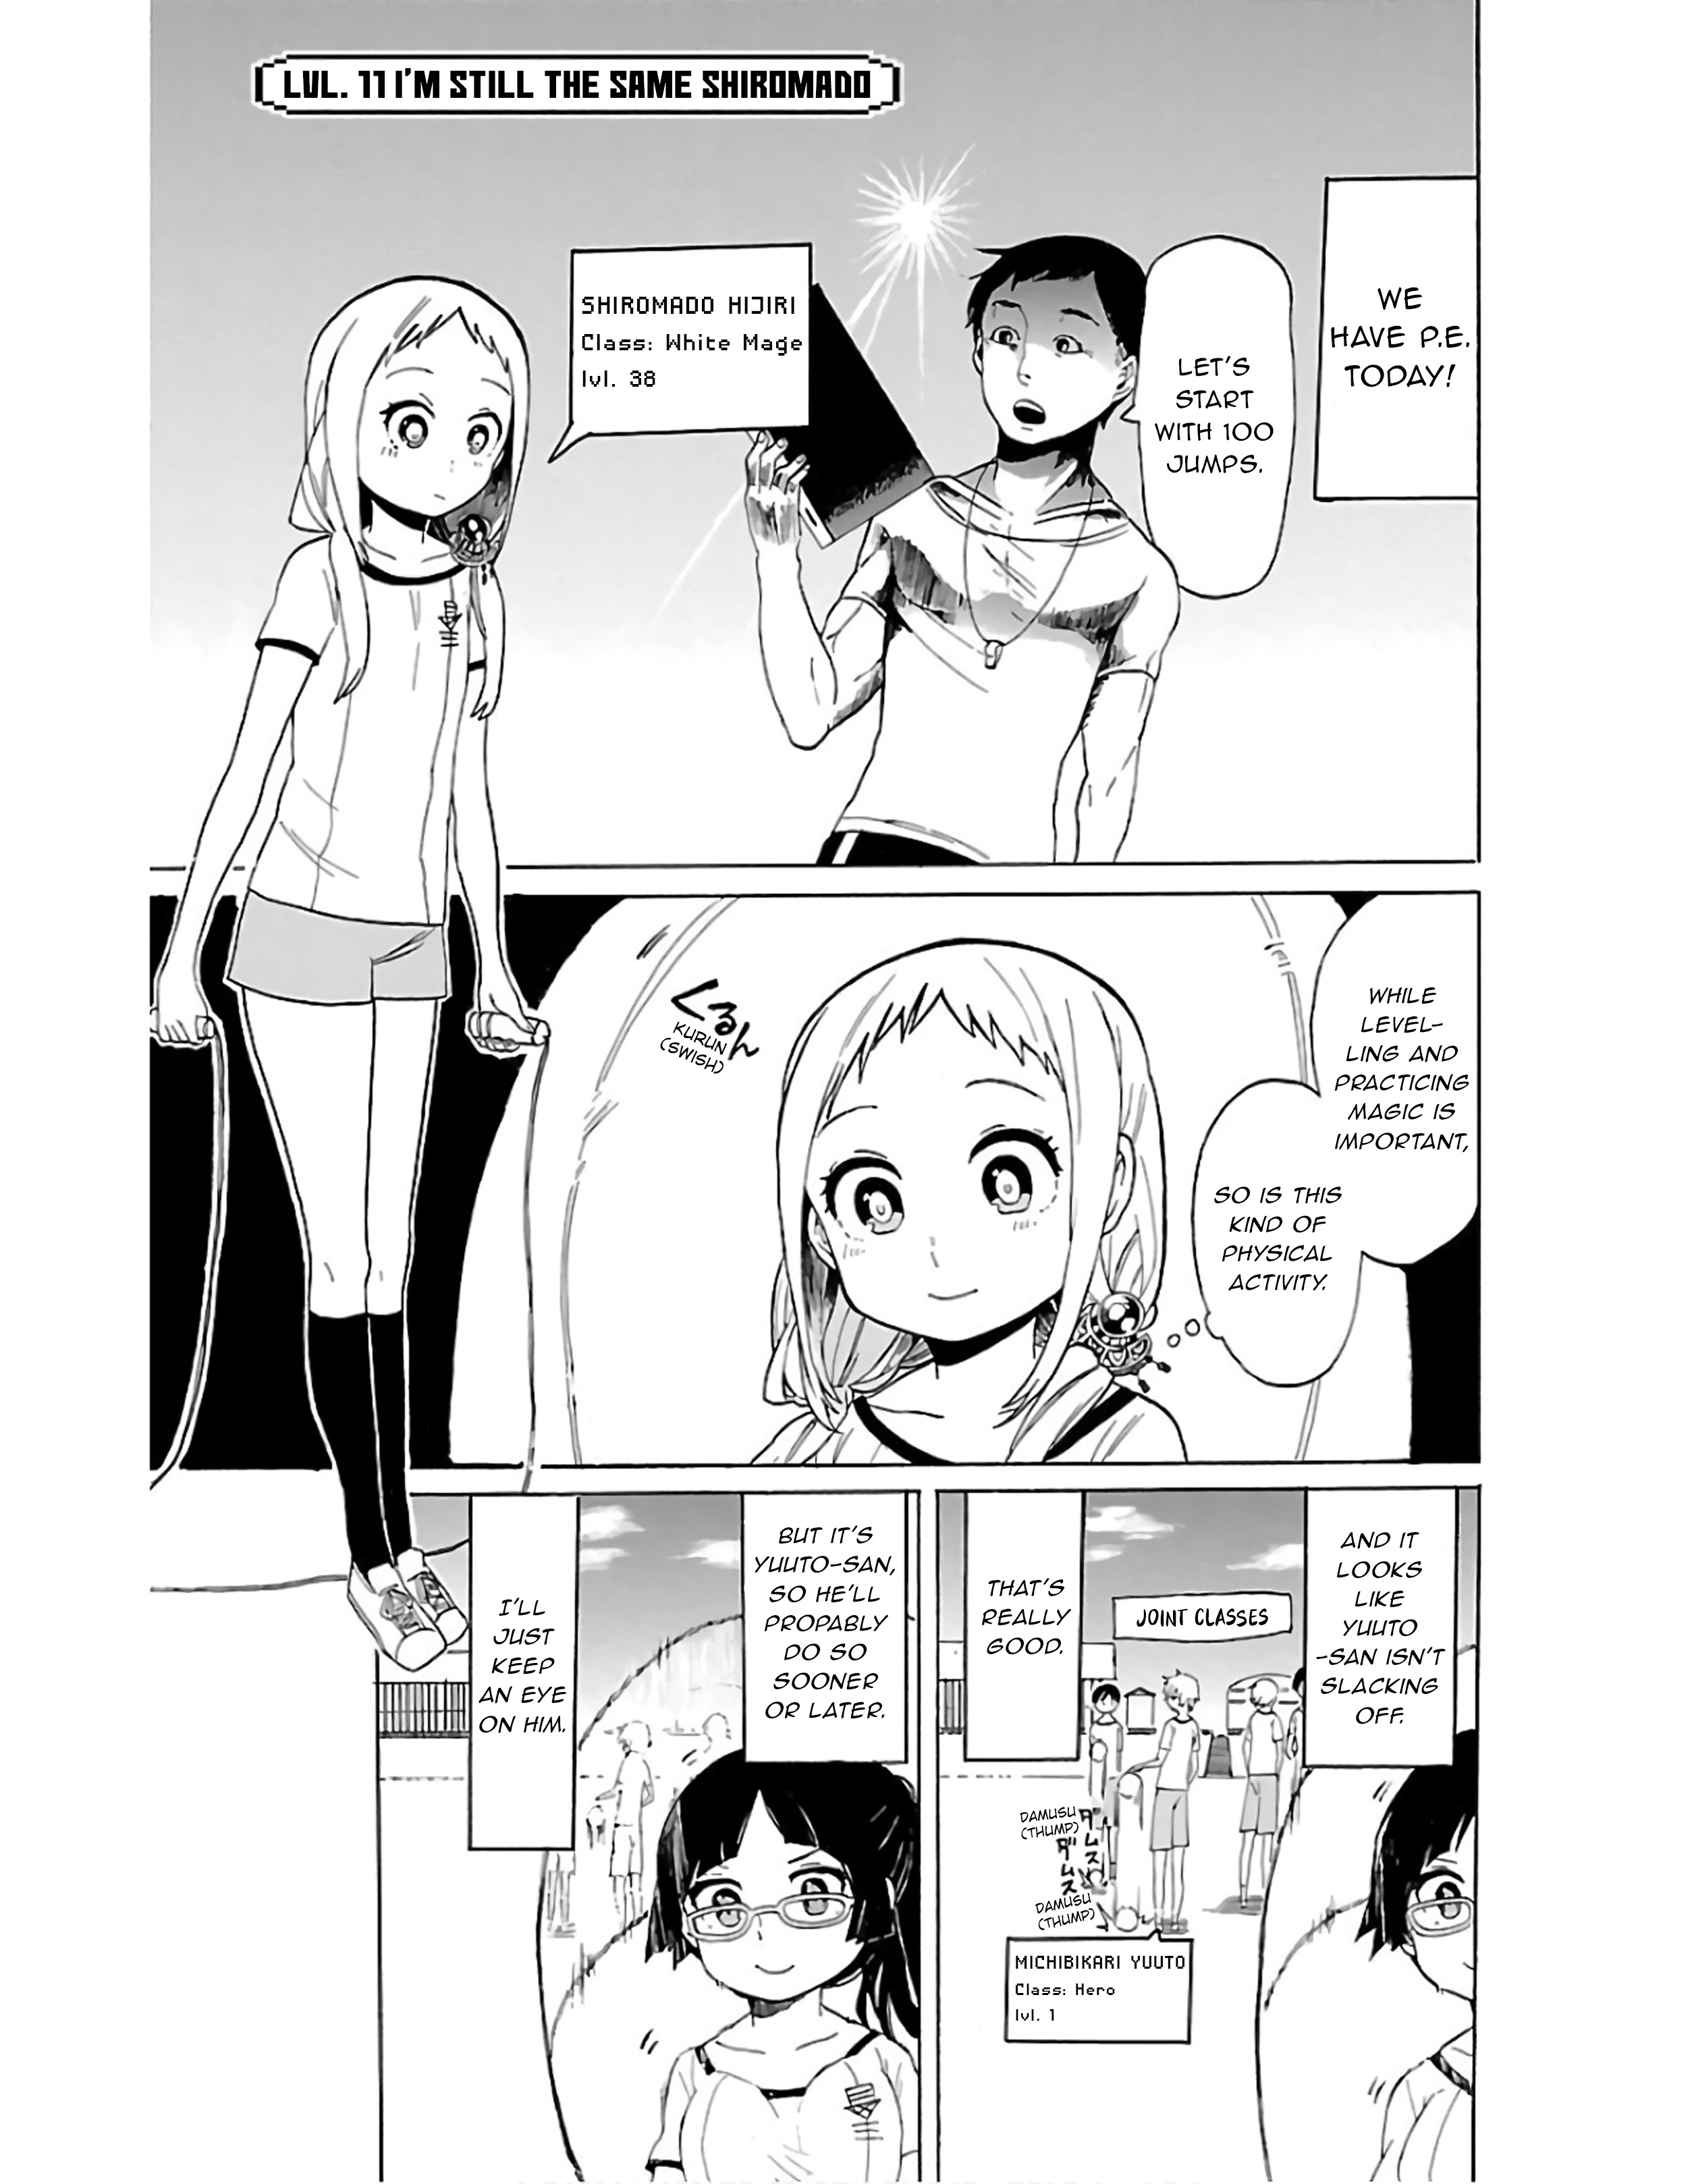 Paper Braver Vol.1 Chapter 11: I'm Still The Same Shiromado - Picture 2